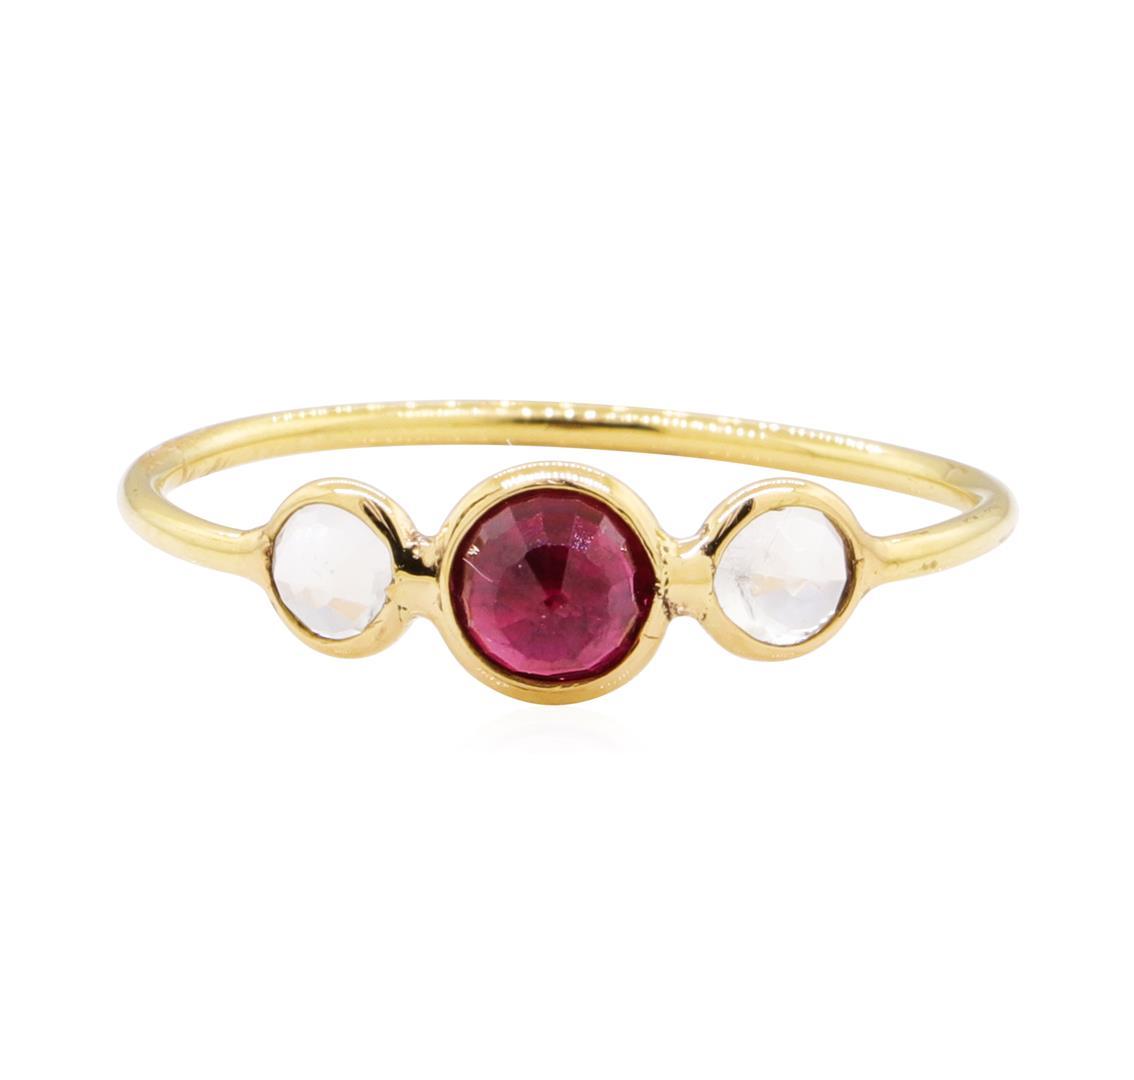 1.20 ctw Ruby and Moonstone Ring - 18KT Yellow Gold